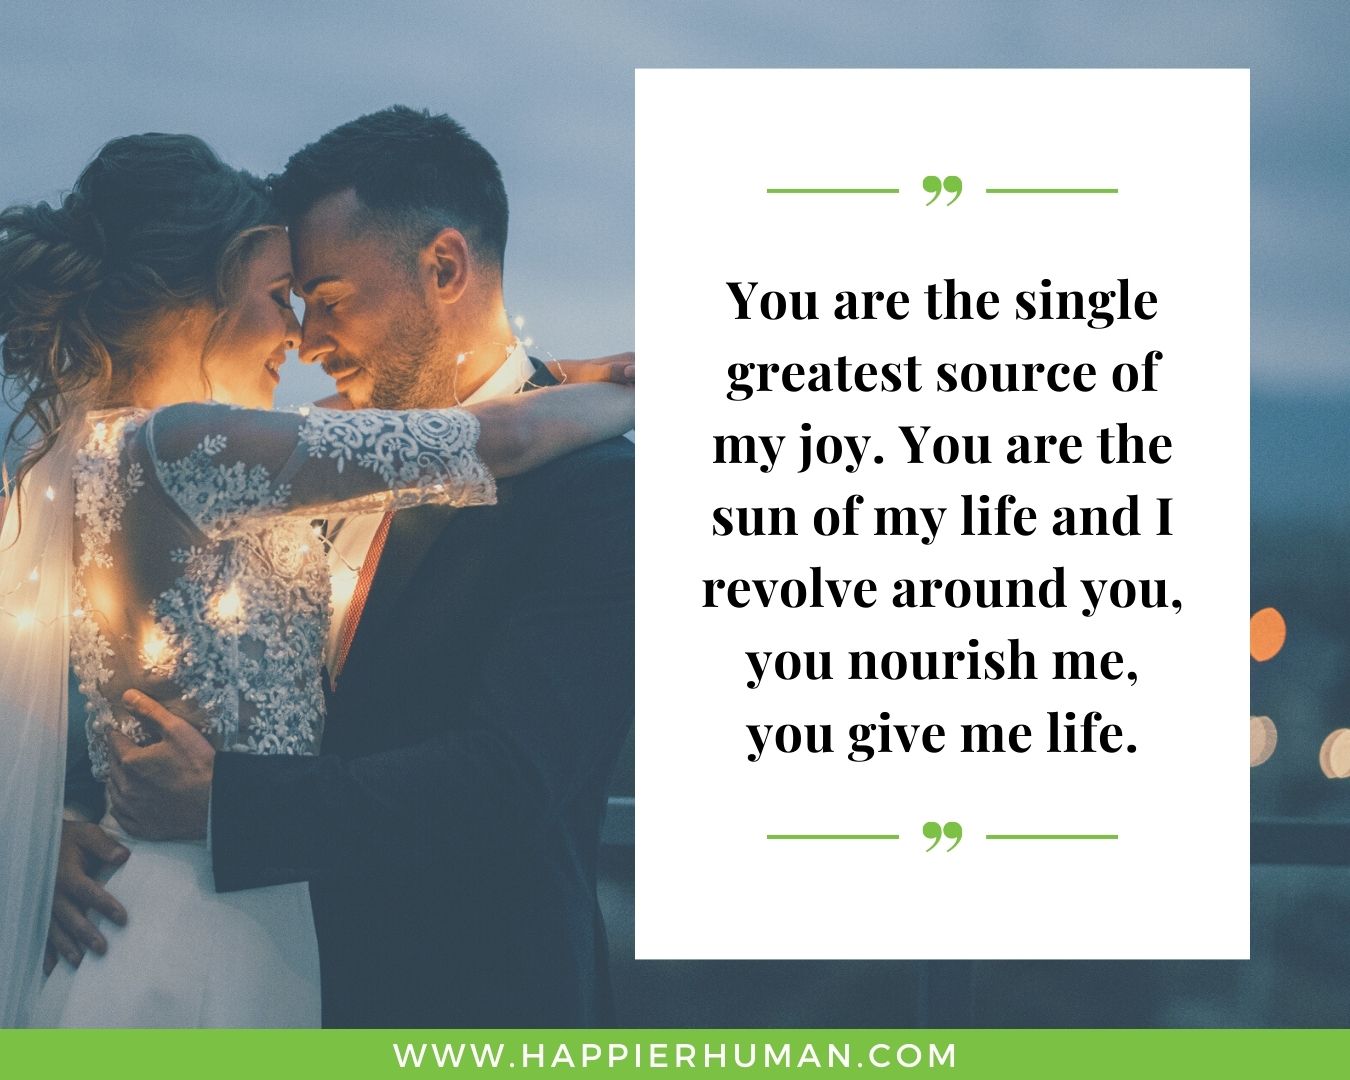 Romantic Love Quotes - “You are the single greatest source of my joy. You are the sun of my life and I revolve around you, you nourish me, you give me life.”